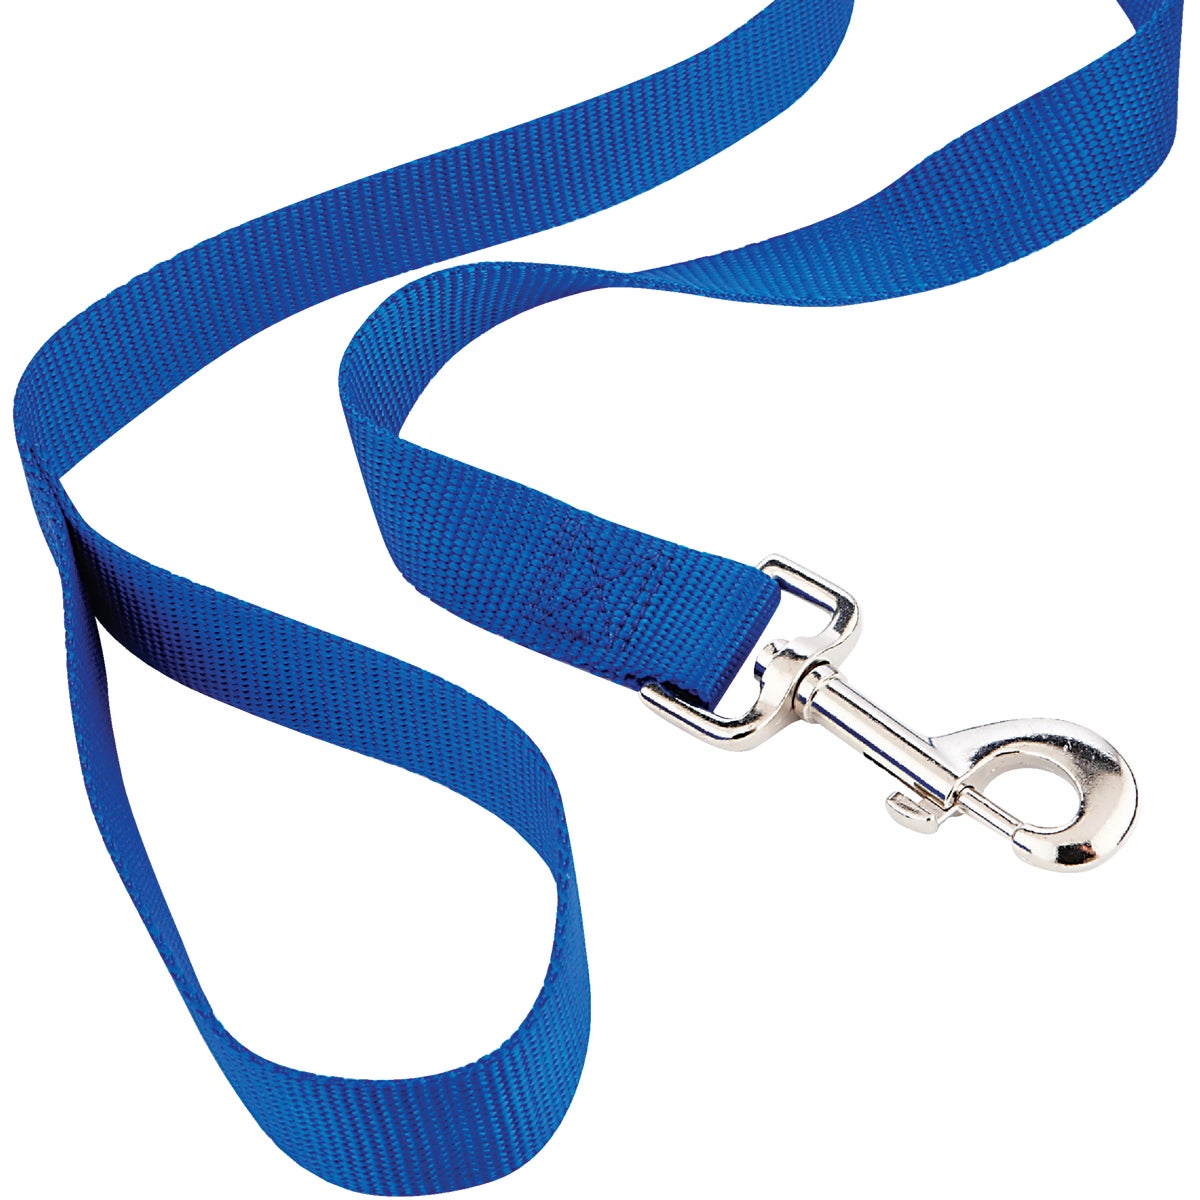 Item 841366, Durable nylon dog leash in a 6-foot length.